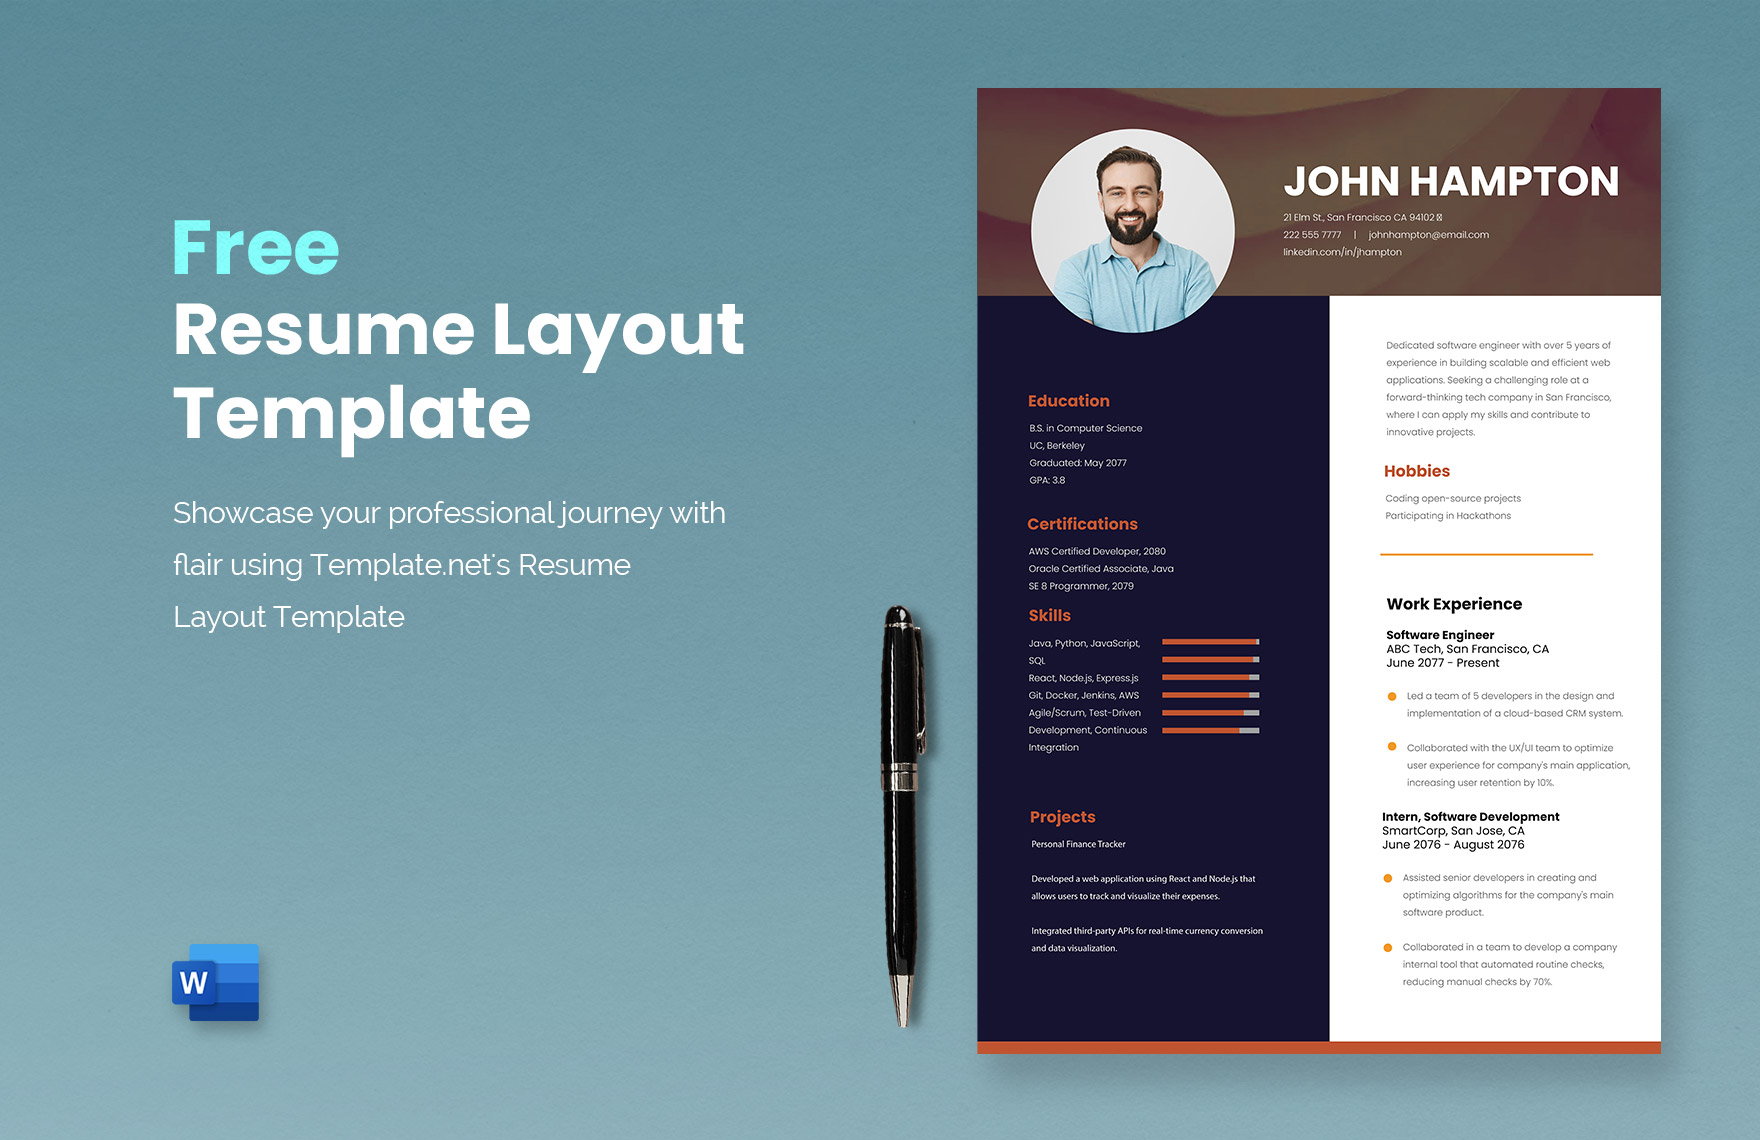 Free Resume Layout Template